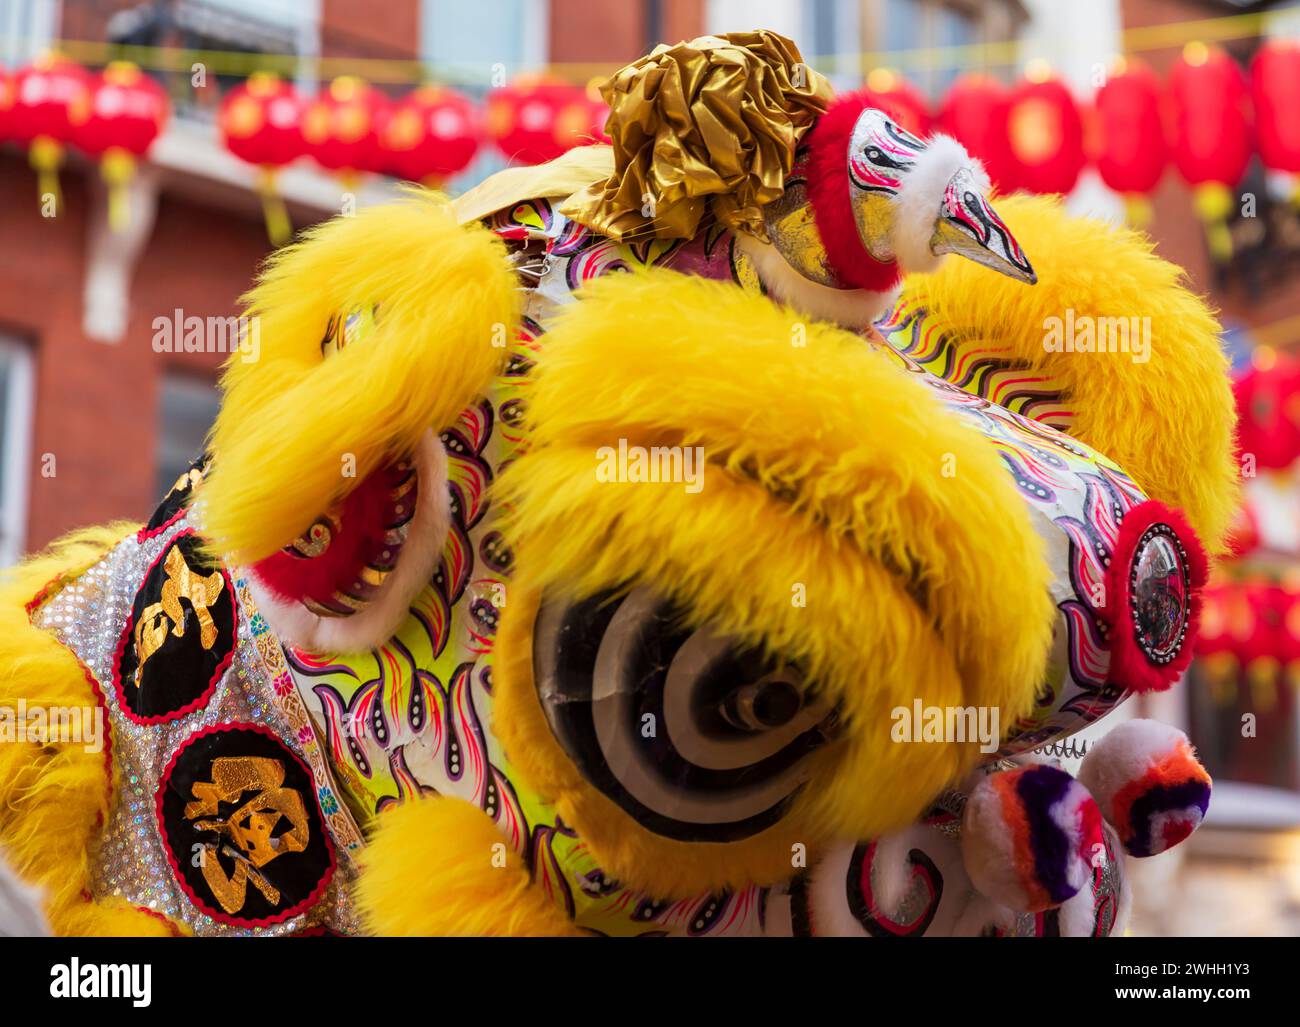 London, UK. 10th Feb 2024. A puppet dragon entertains the crowds gathered to celebrate Chinese New Year (Year of the Dragon) in London's China Town. The Chinese zodiac is a repeating 12-year cycle of animal signs based on the lunar calendar. The Lunar New Year marks the transition from one animal to another. Credit: Stuart Robertson/Alamy Live News. Stock Photo